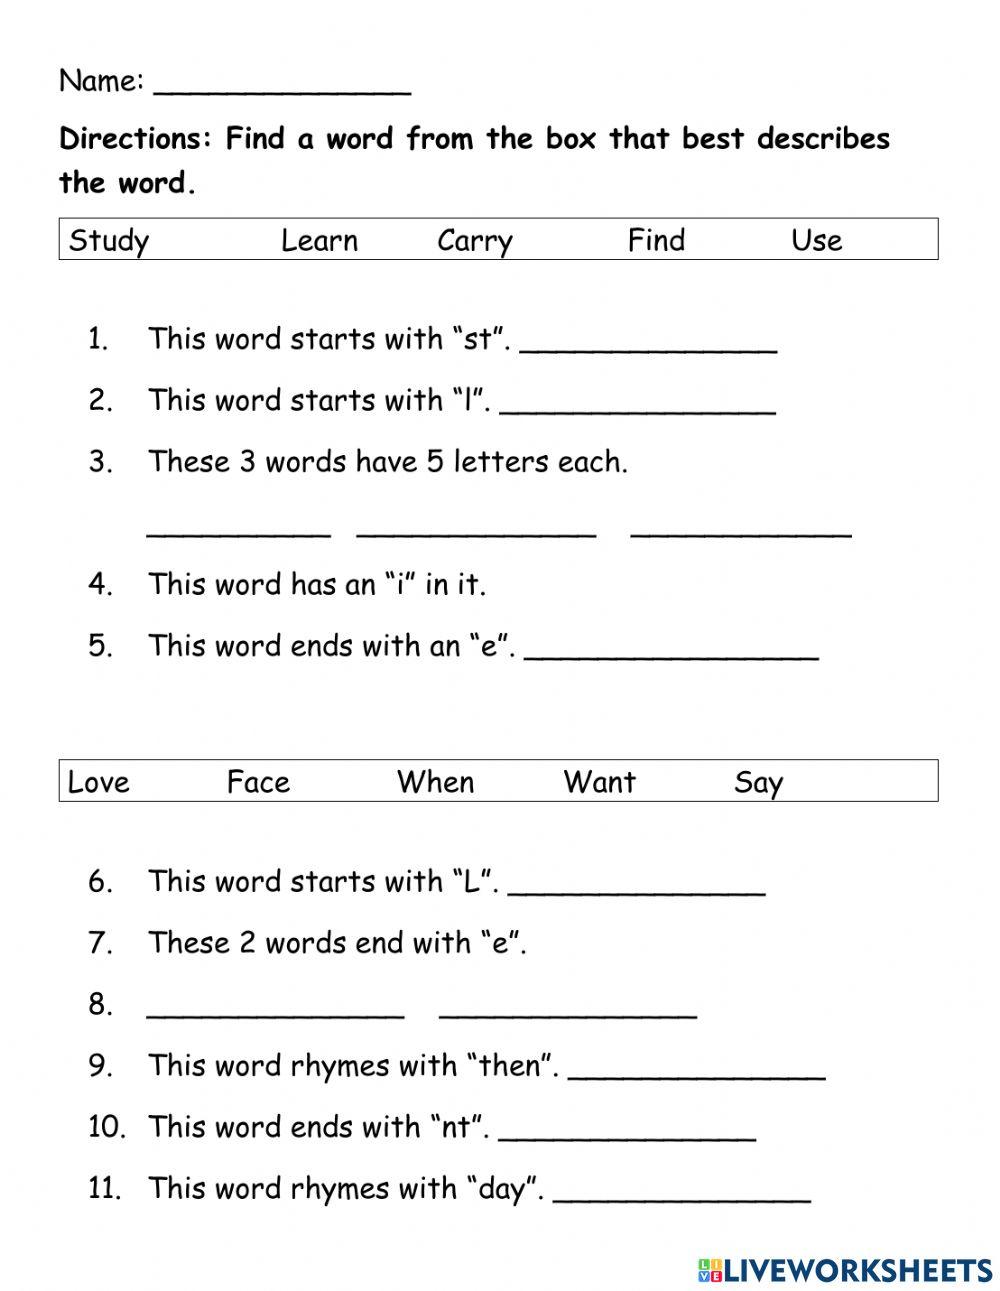 High frequency words: want, when, use